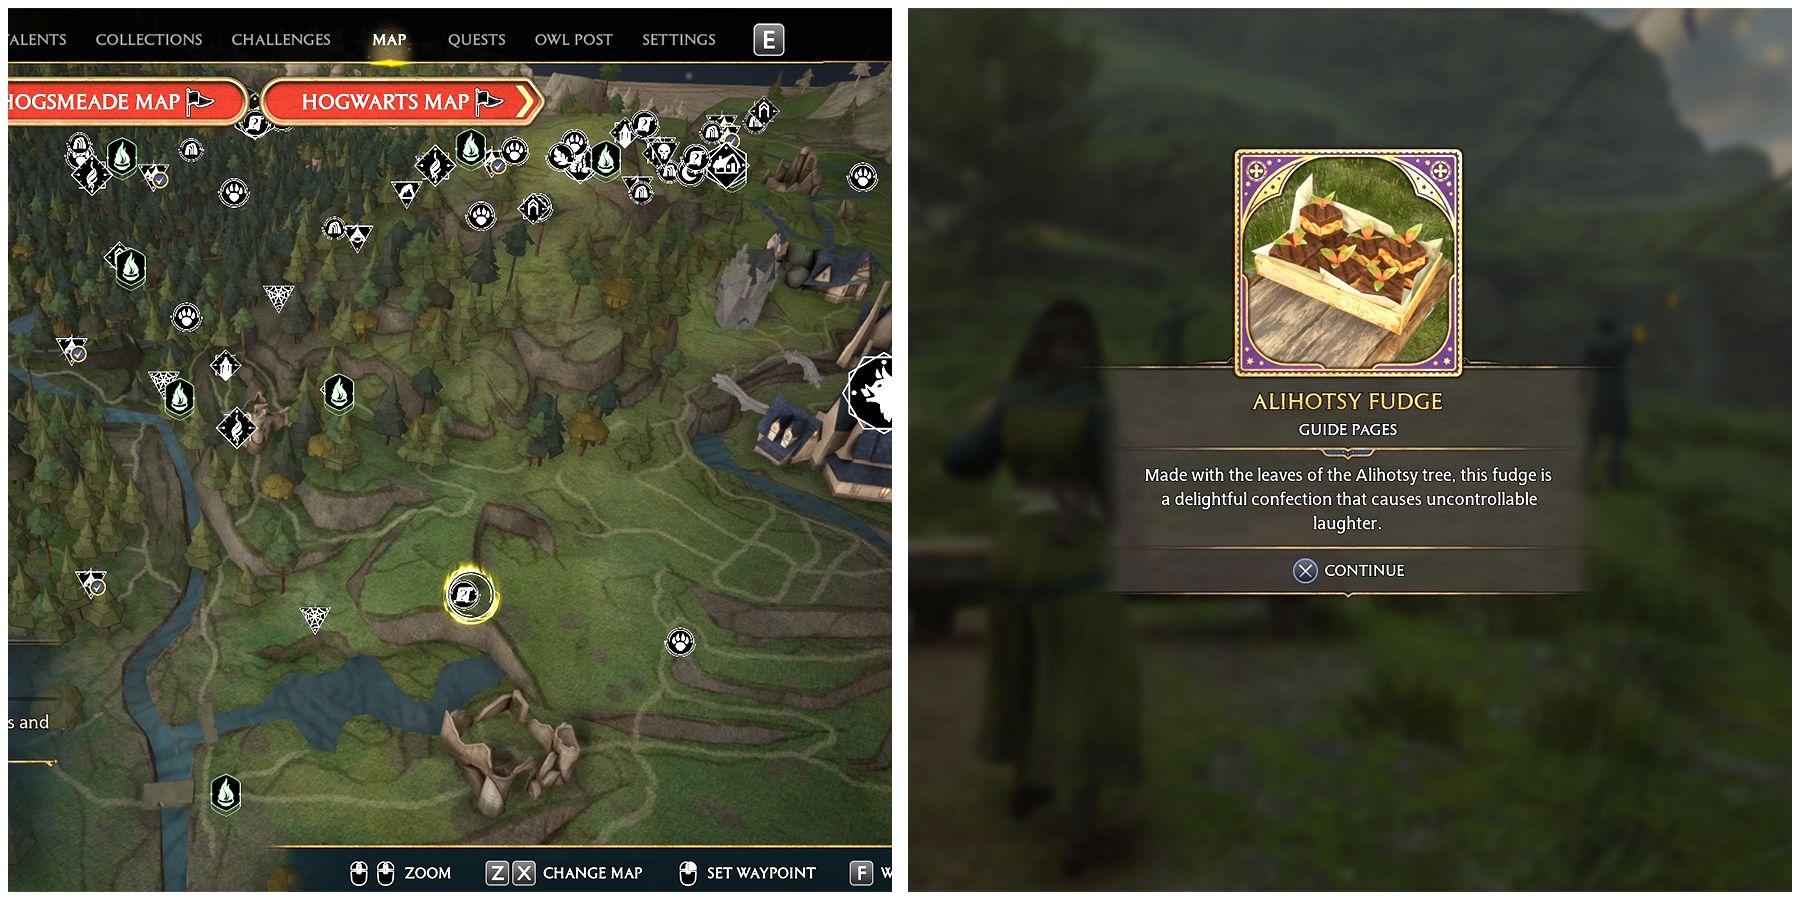 alihosty fudge field guide pages locations in hogwarts legacy